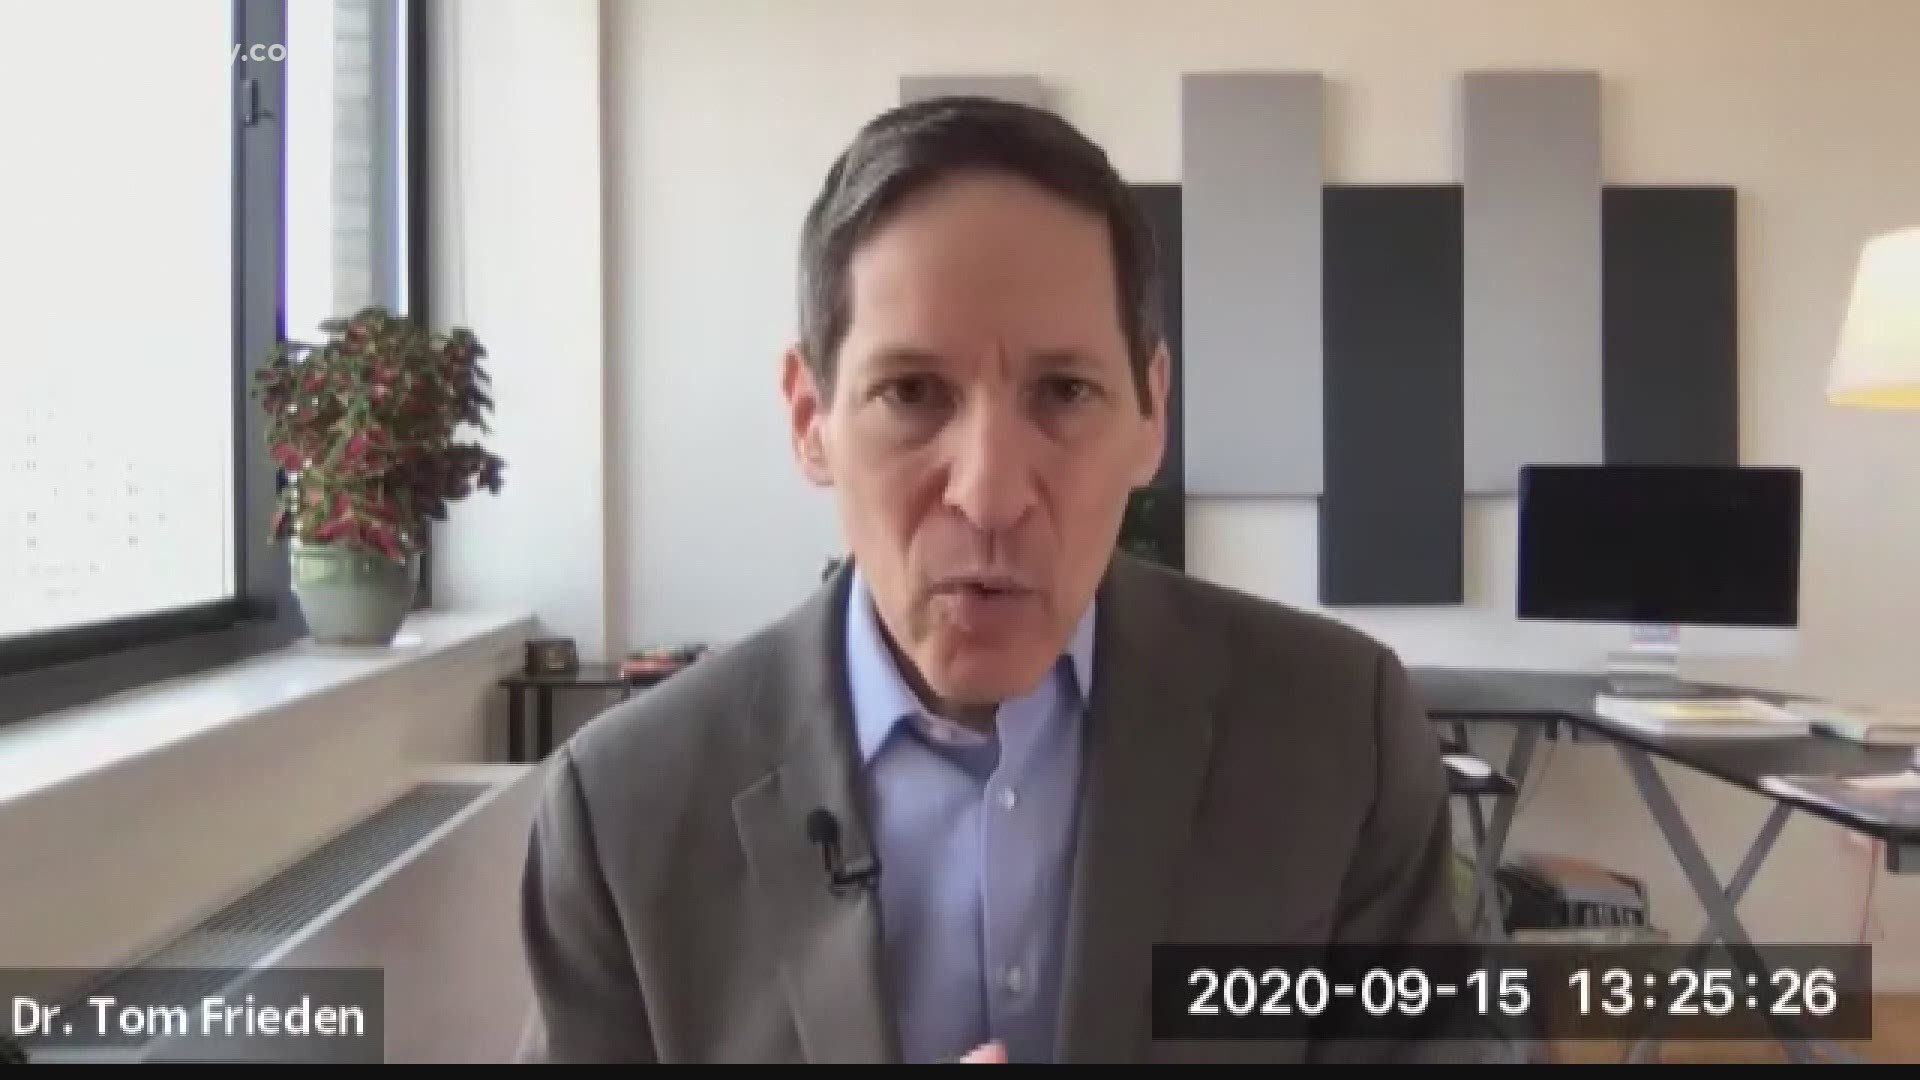 Former CDC Director Dr. Tom Frieden gave perspective today on topics surrounding the coronavirus pandemic.